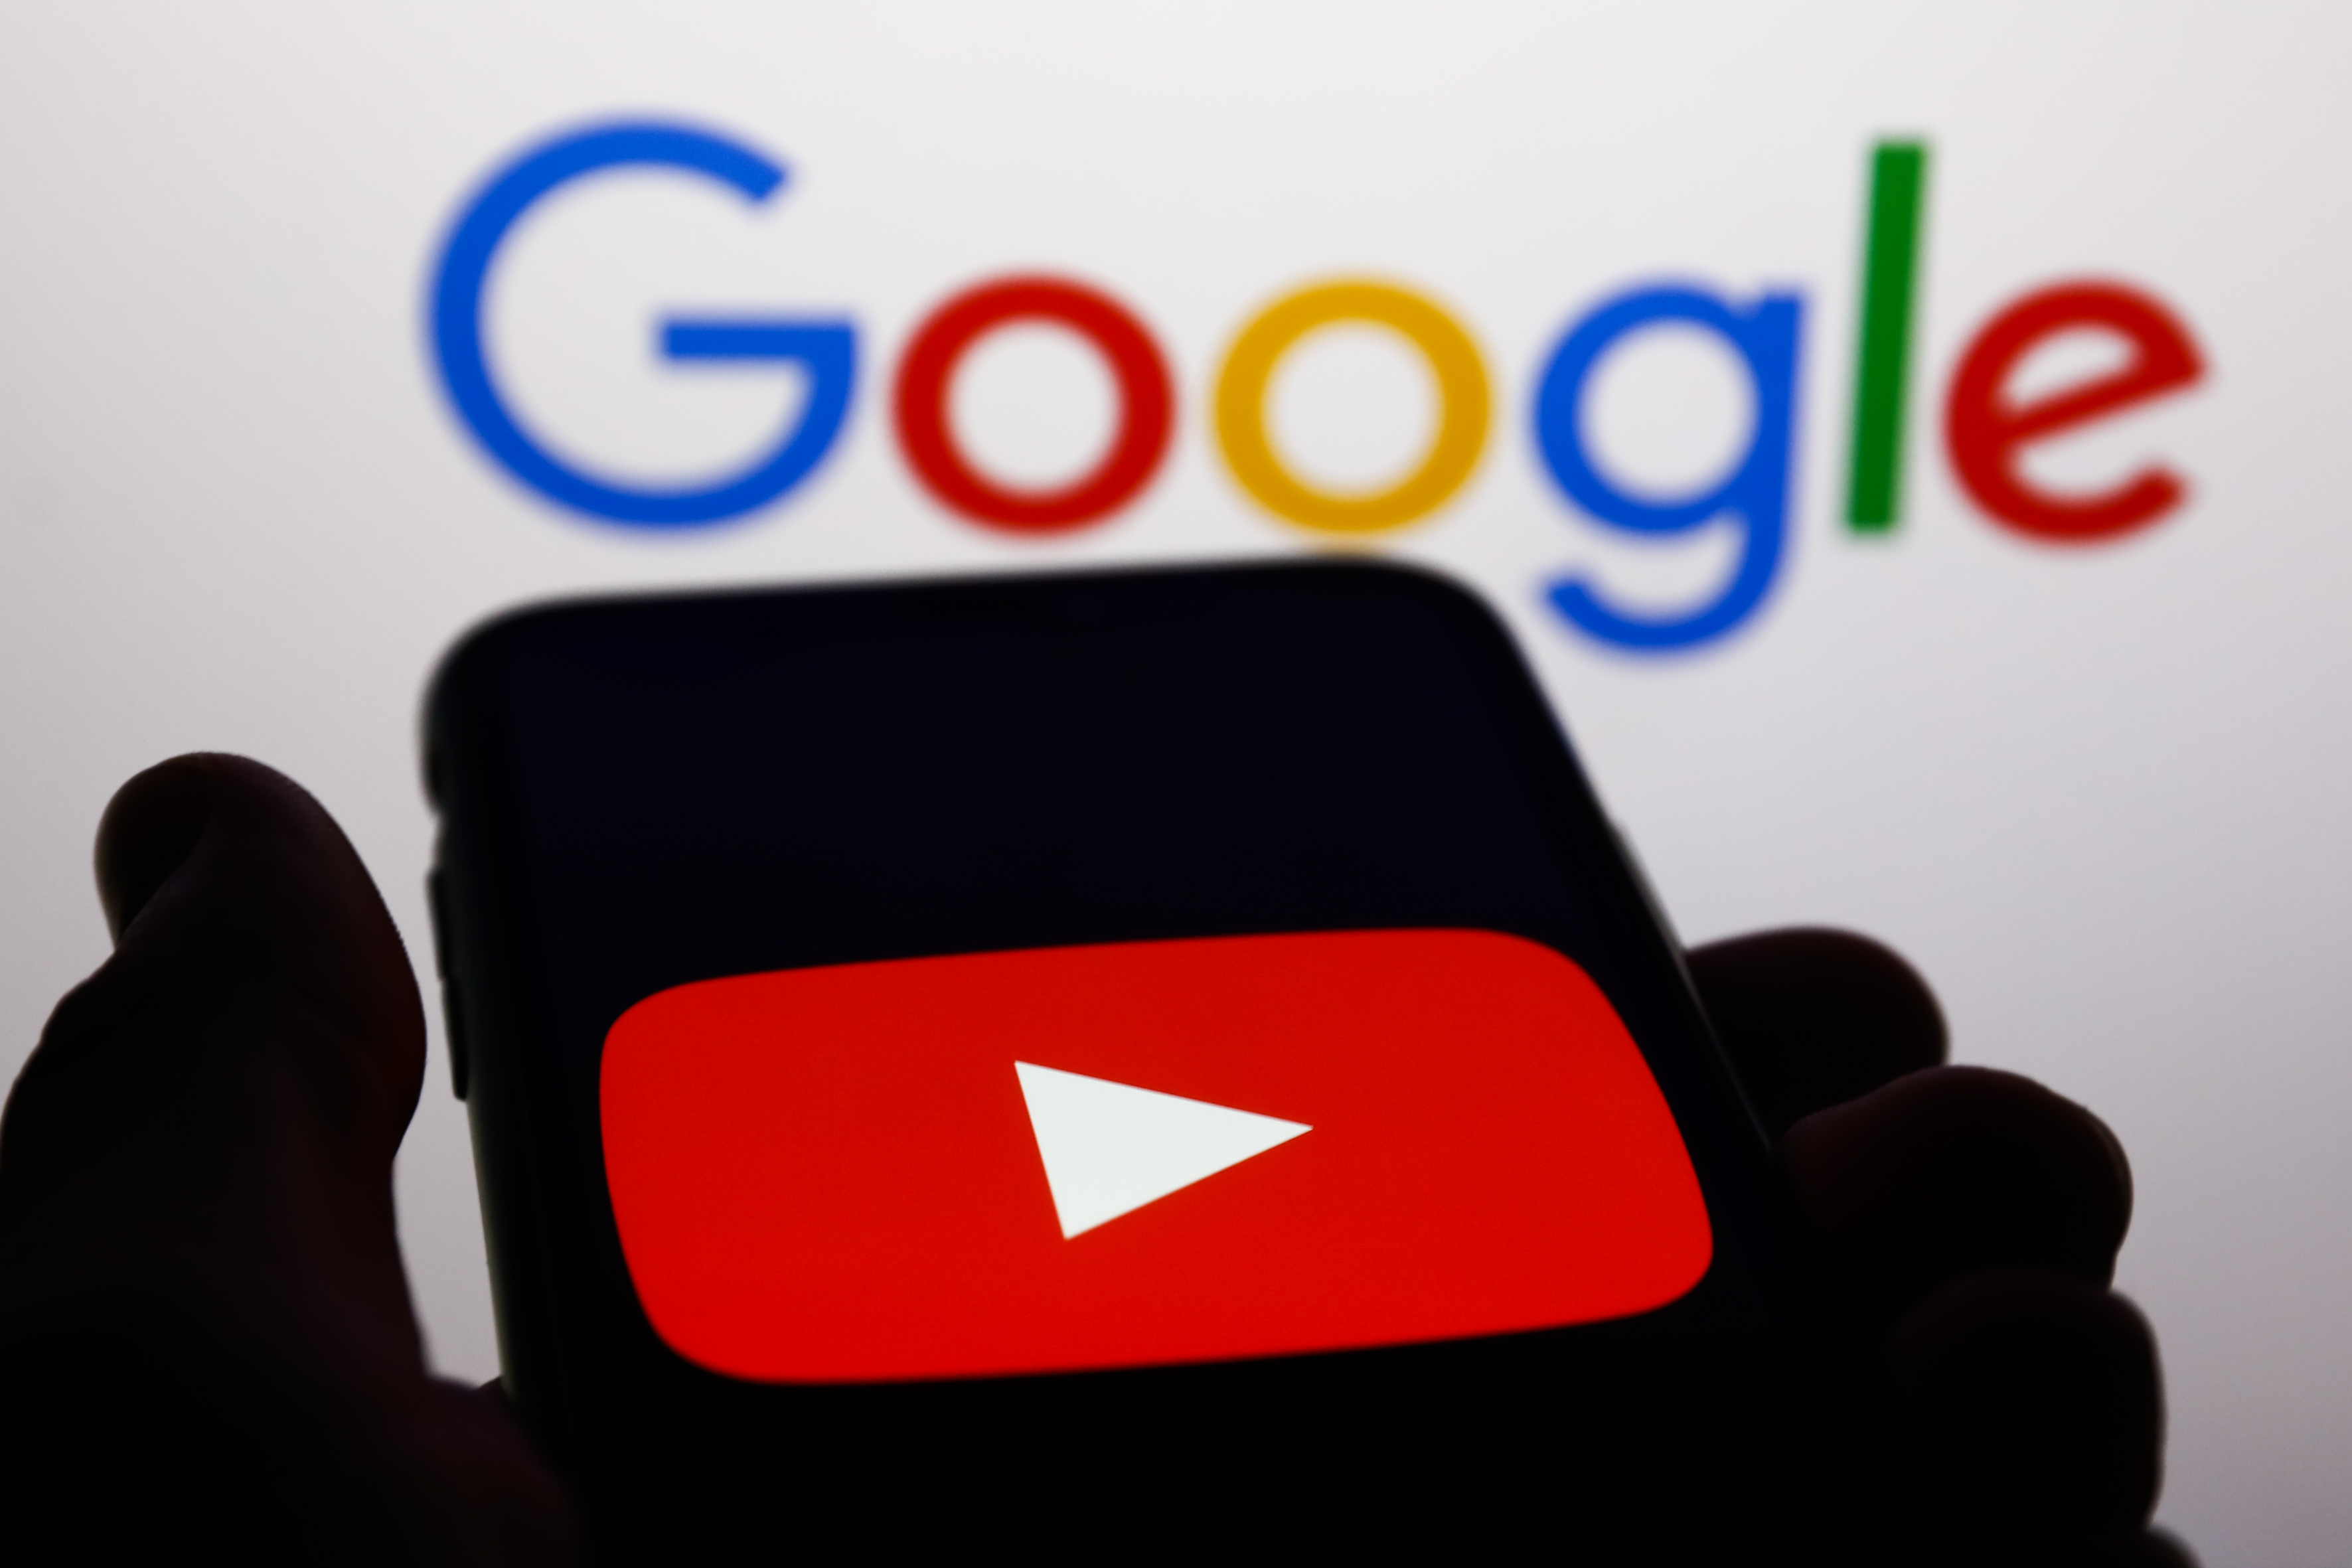 YouTube logo displayed on a phone screen and Google logo displayed on a screen